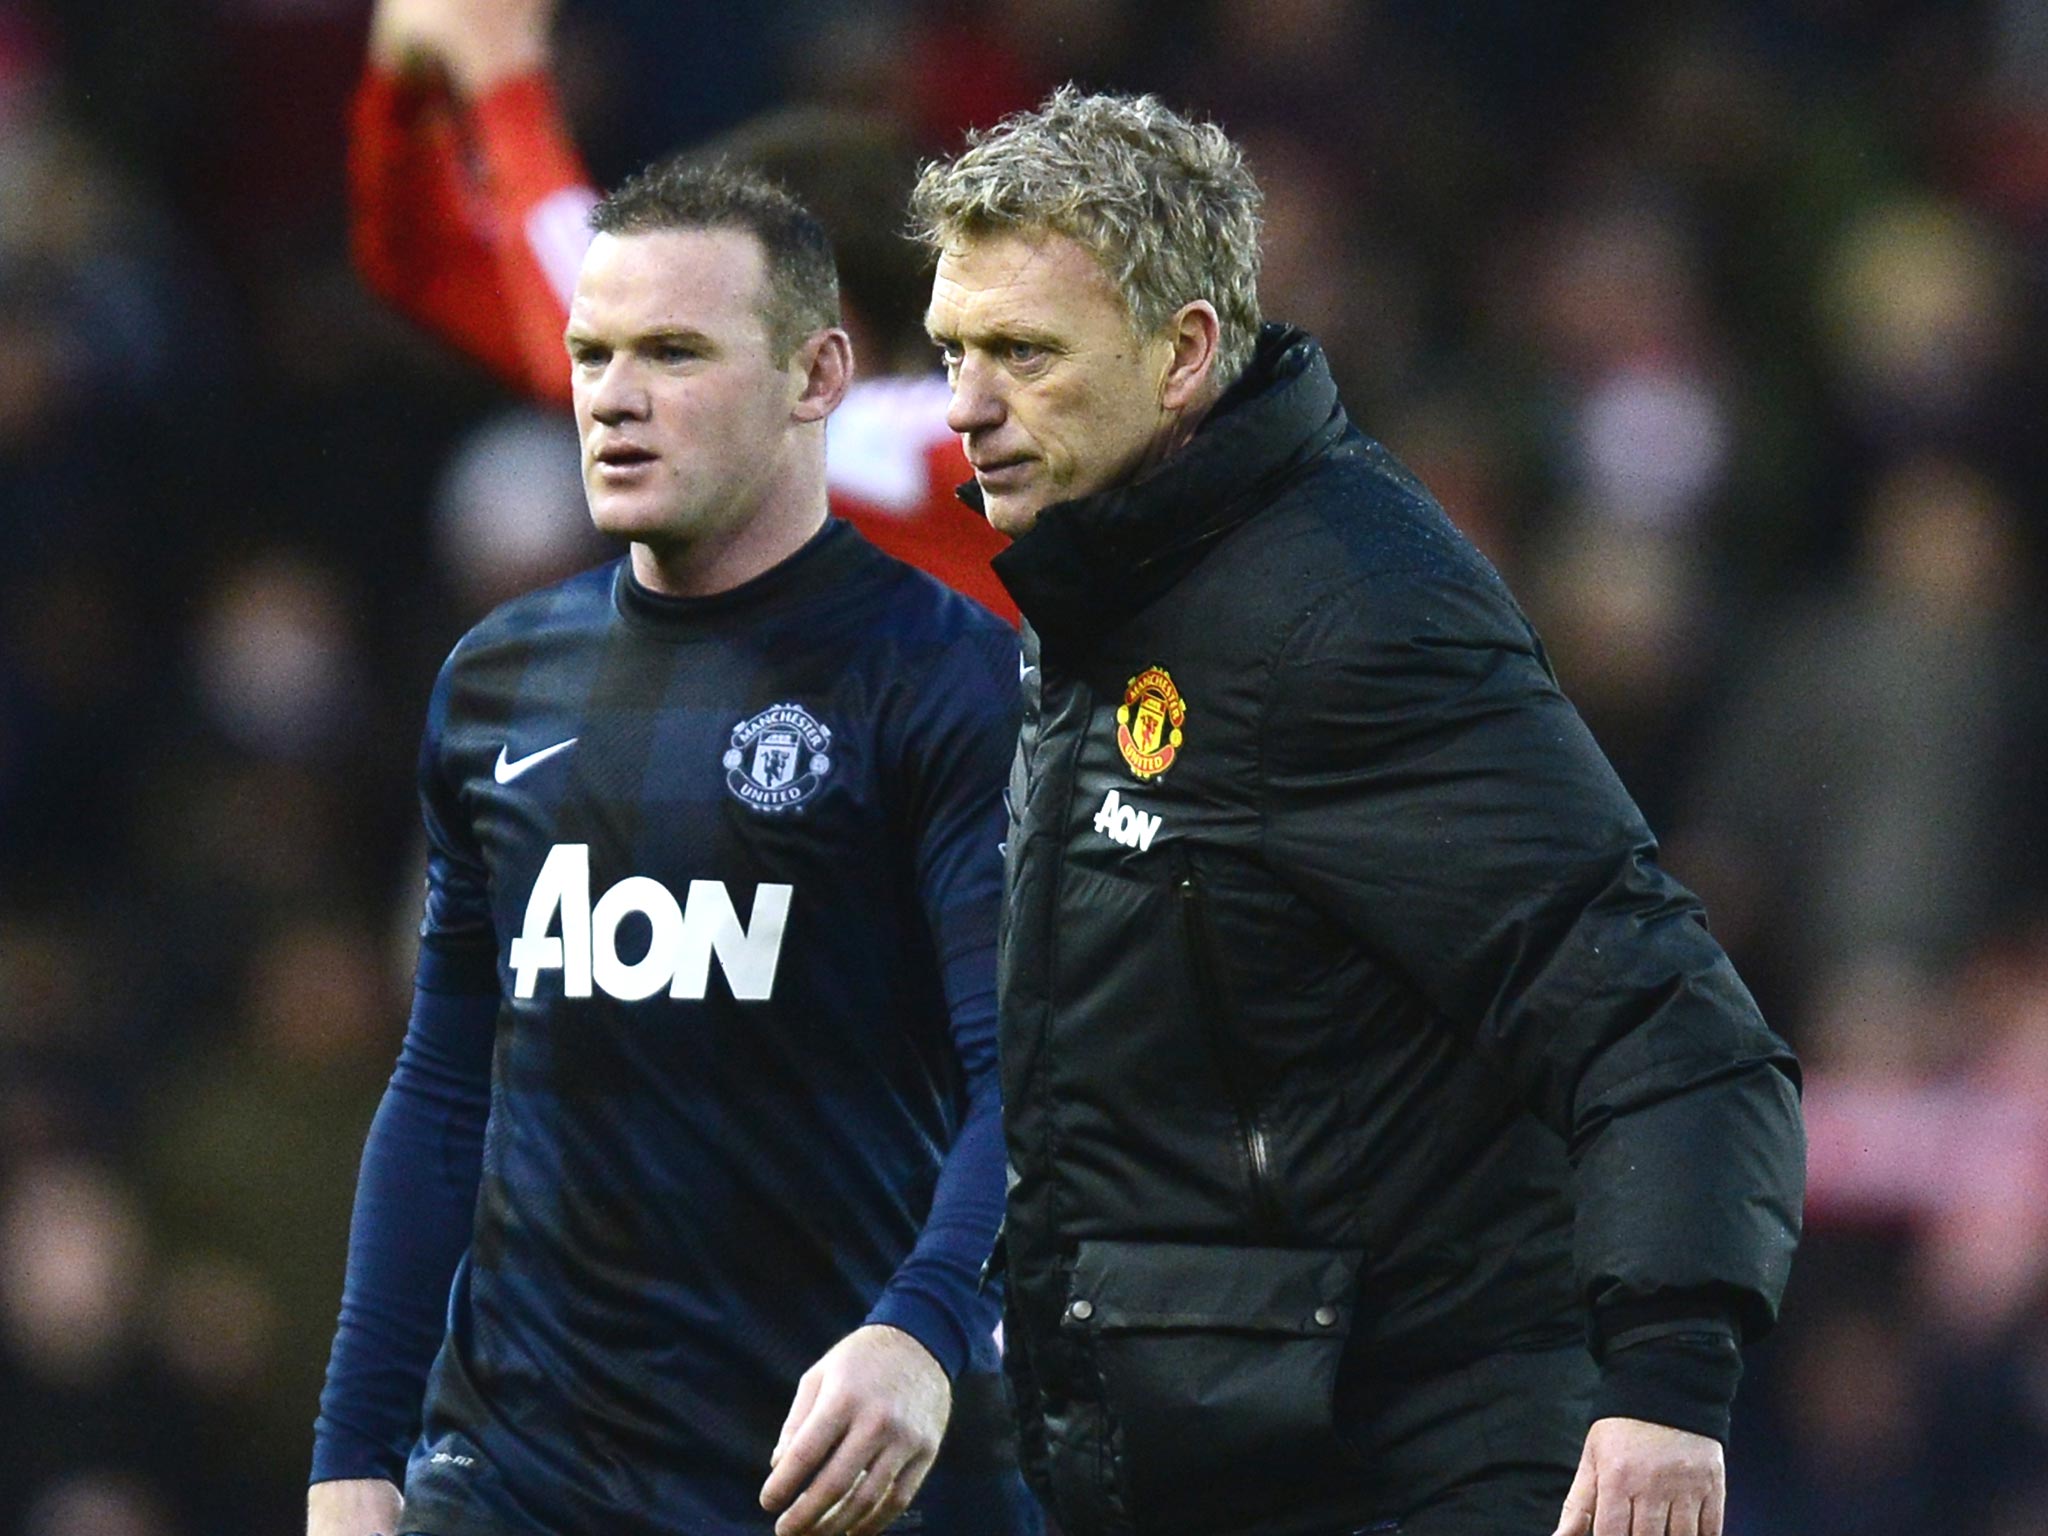 David Moyes has completed a new deal for Wayne Rooney